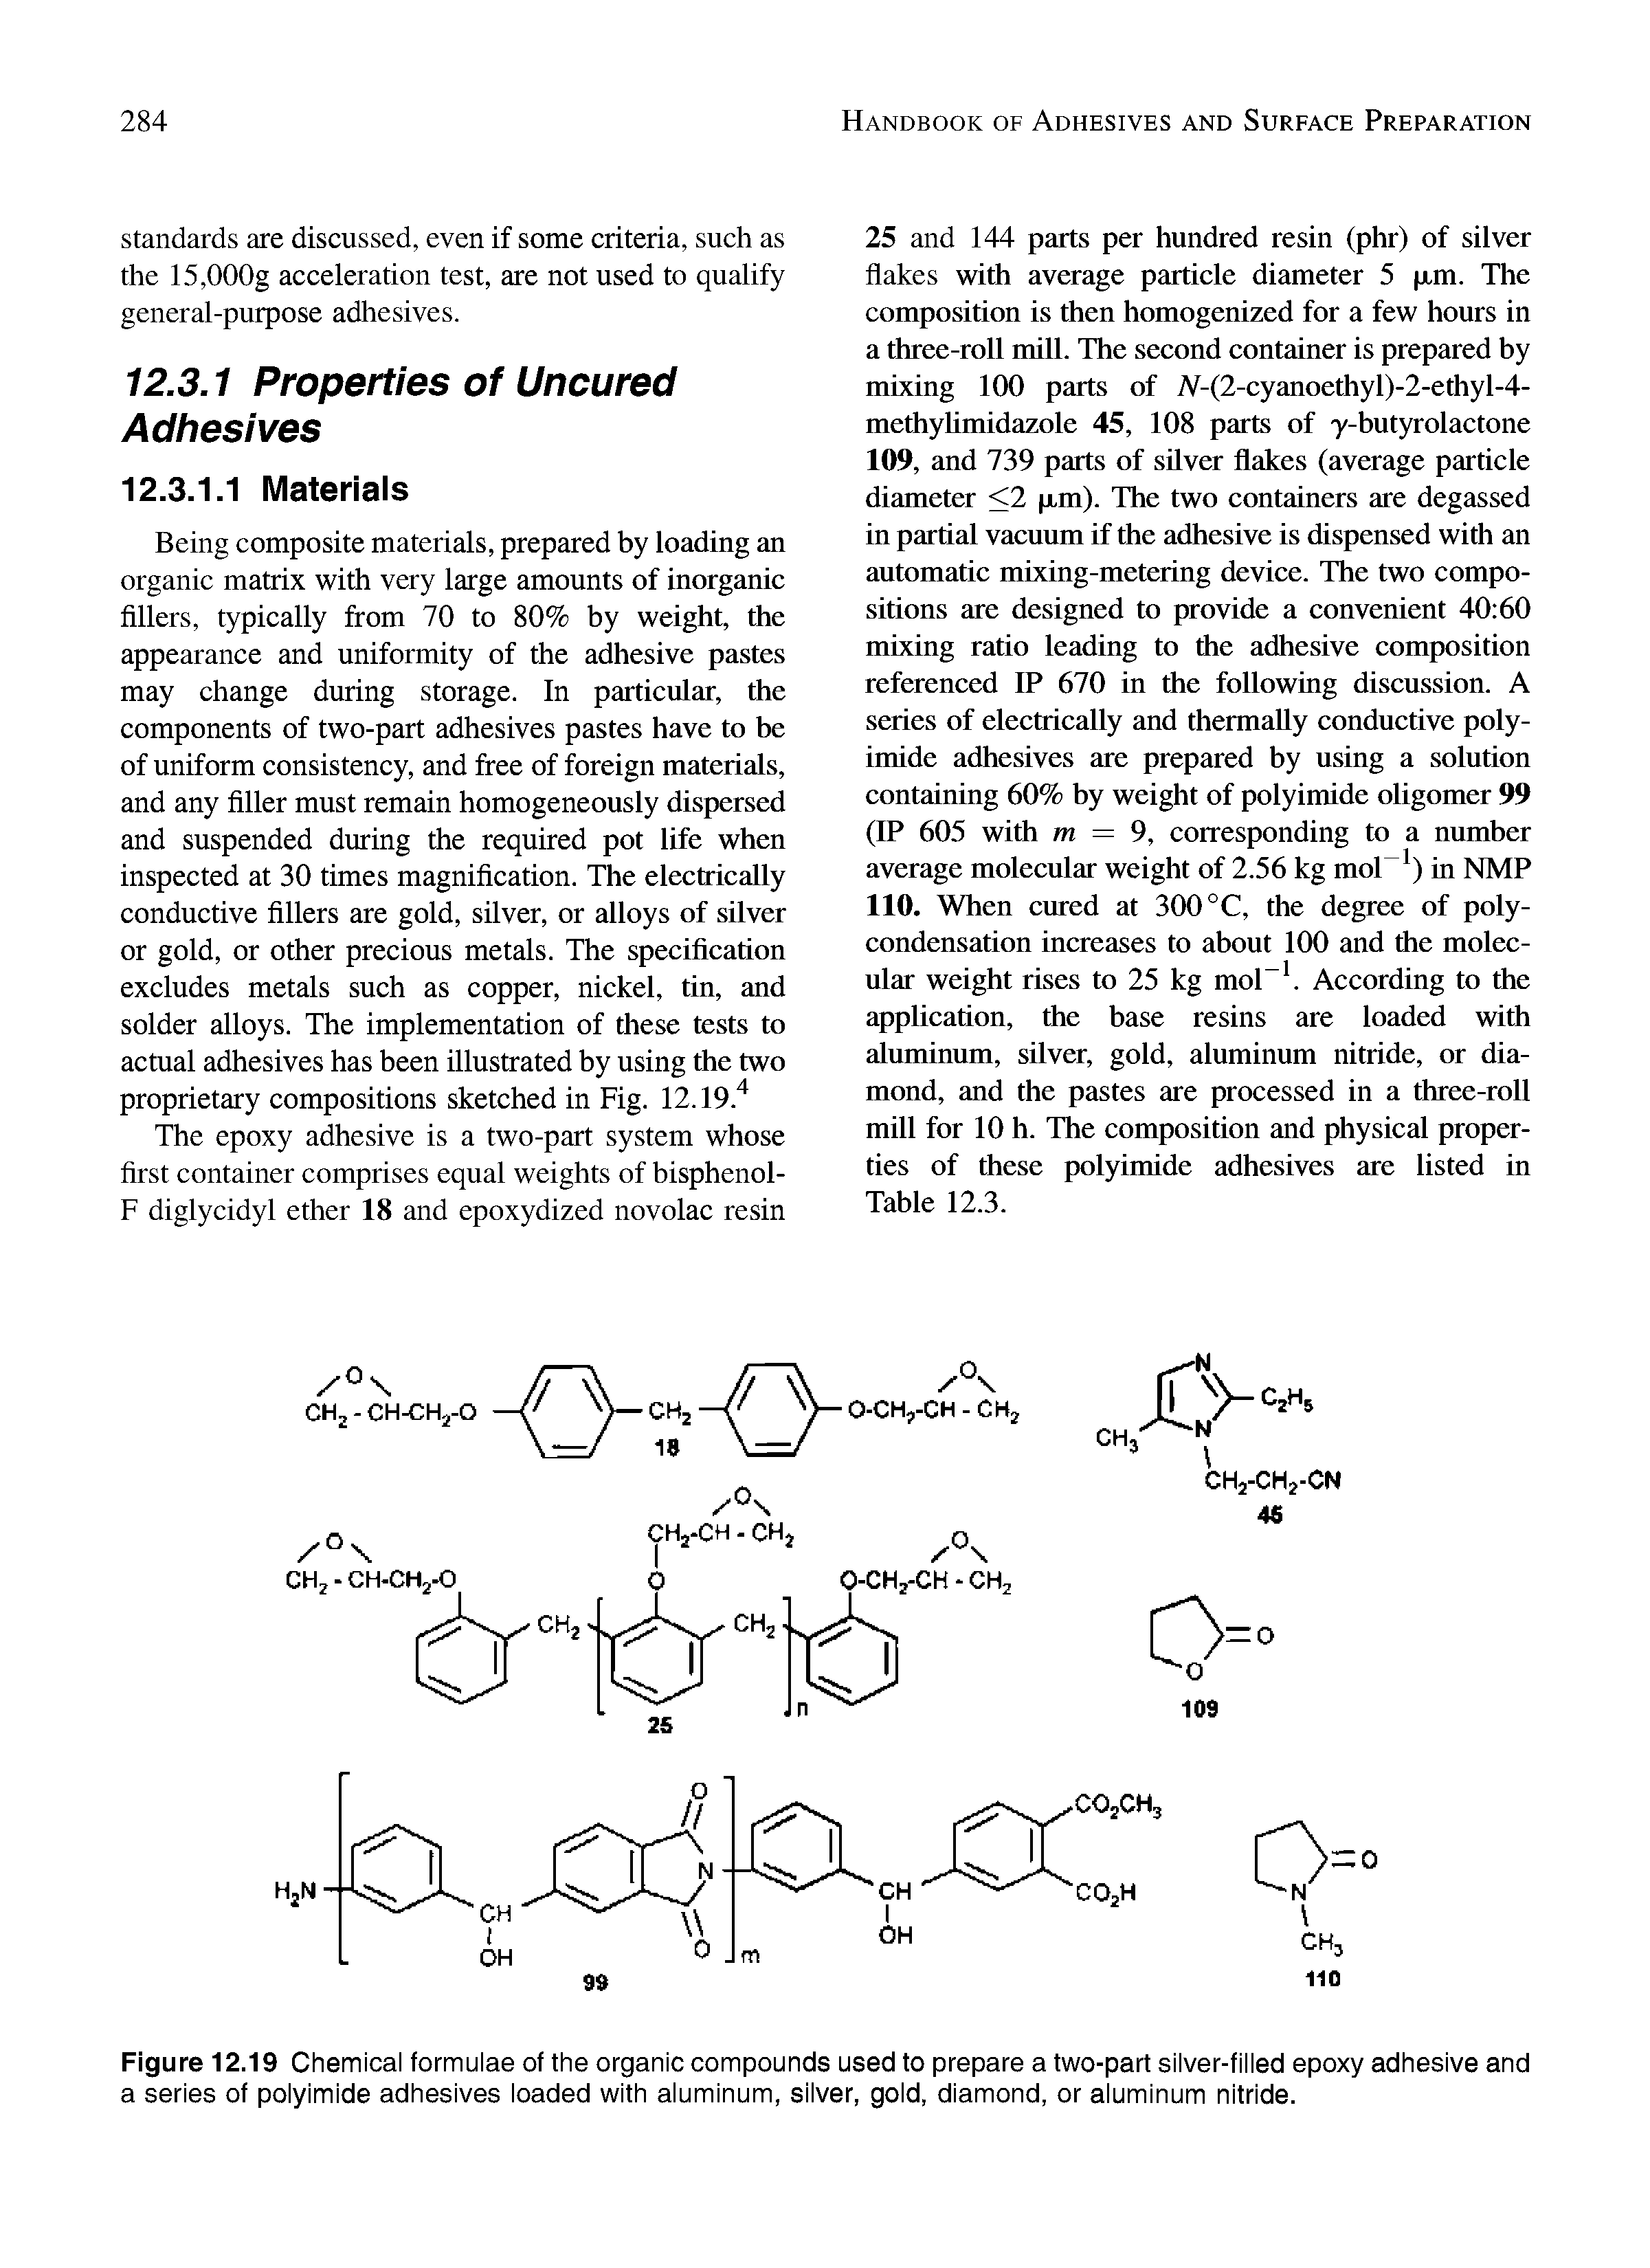 Figure 12.19 Chemical formulae of the organic compounds used to prepare a two-part silver-filled epoxy adhesive and a series of polyimide adhesives loaded with aluminum, silver, gold, diamond, or aluminum nitride.